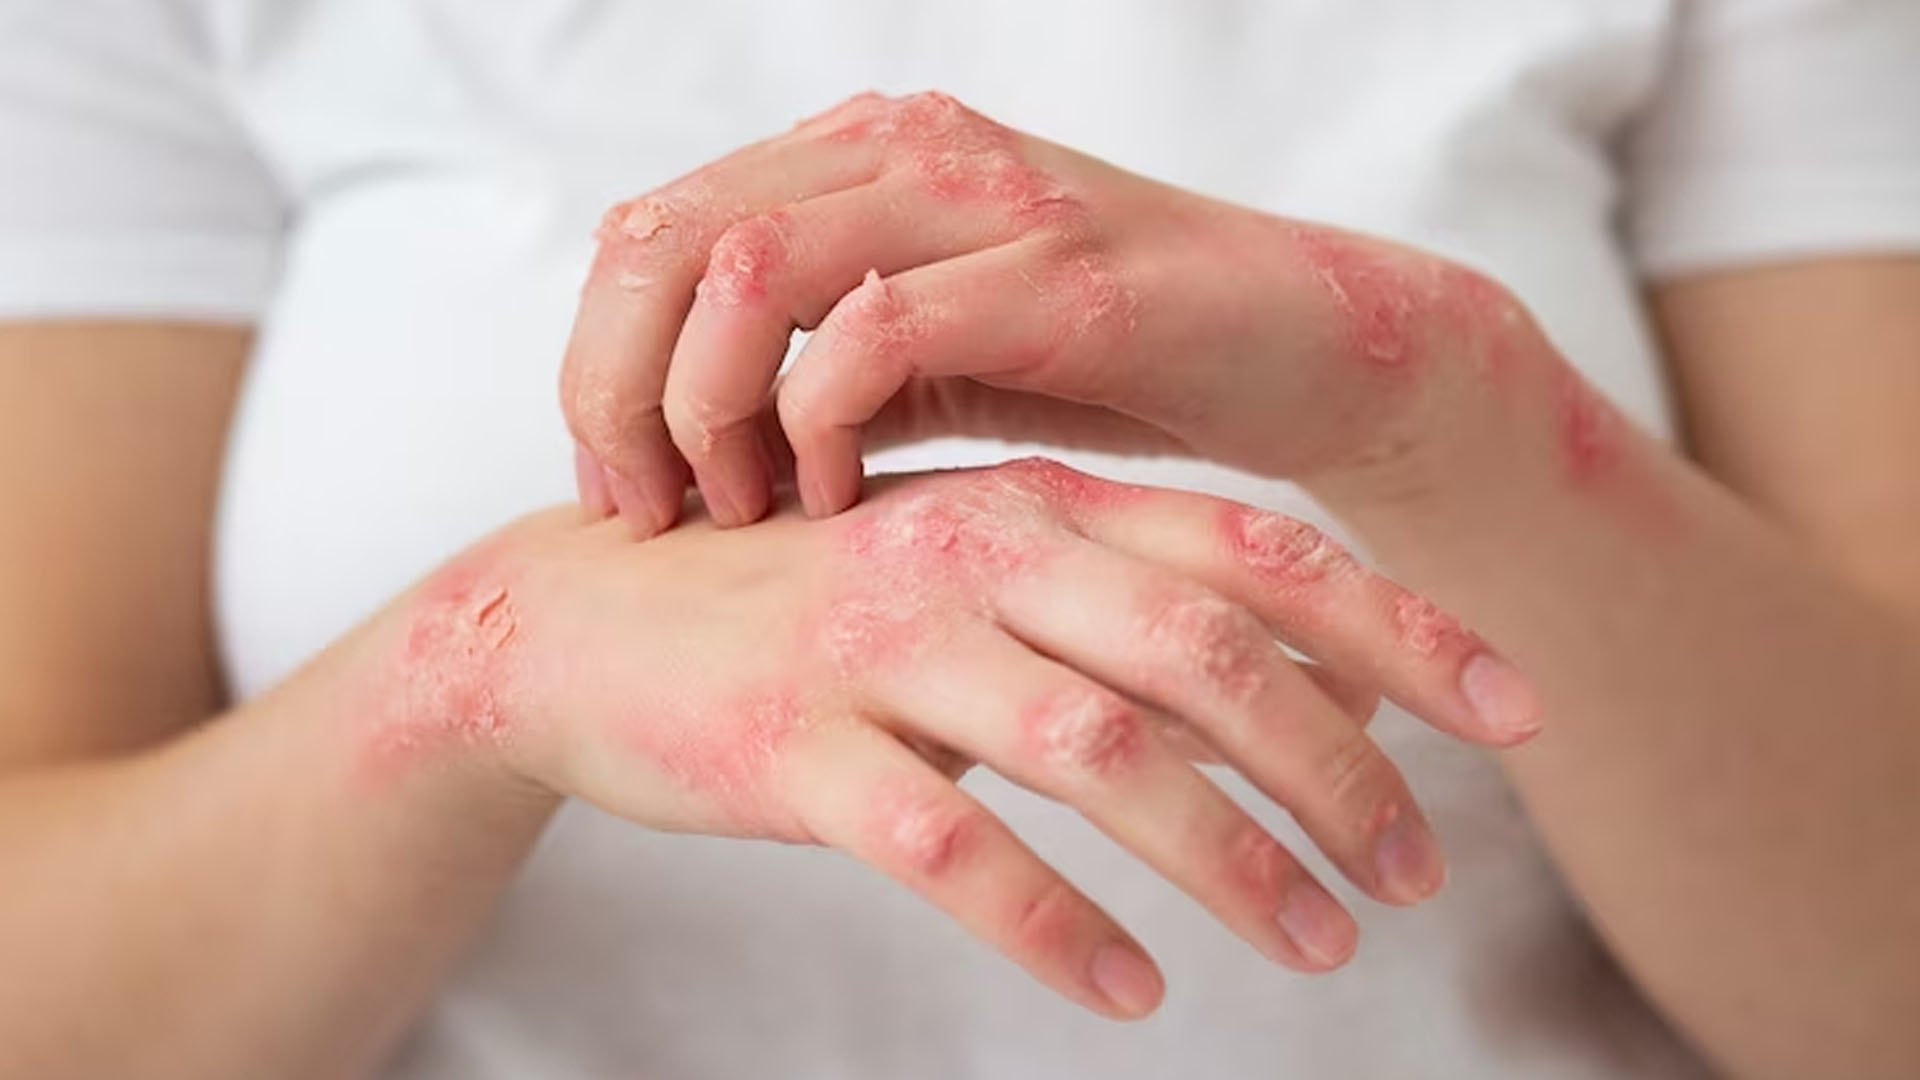 What are the Symptoms of Leprosy?